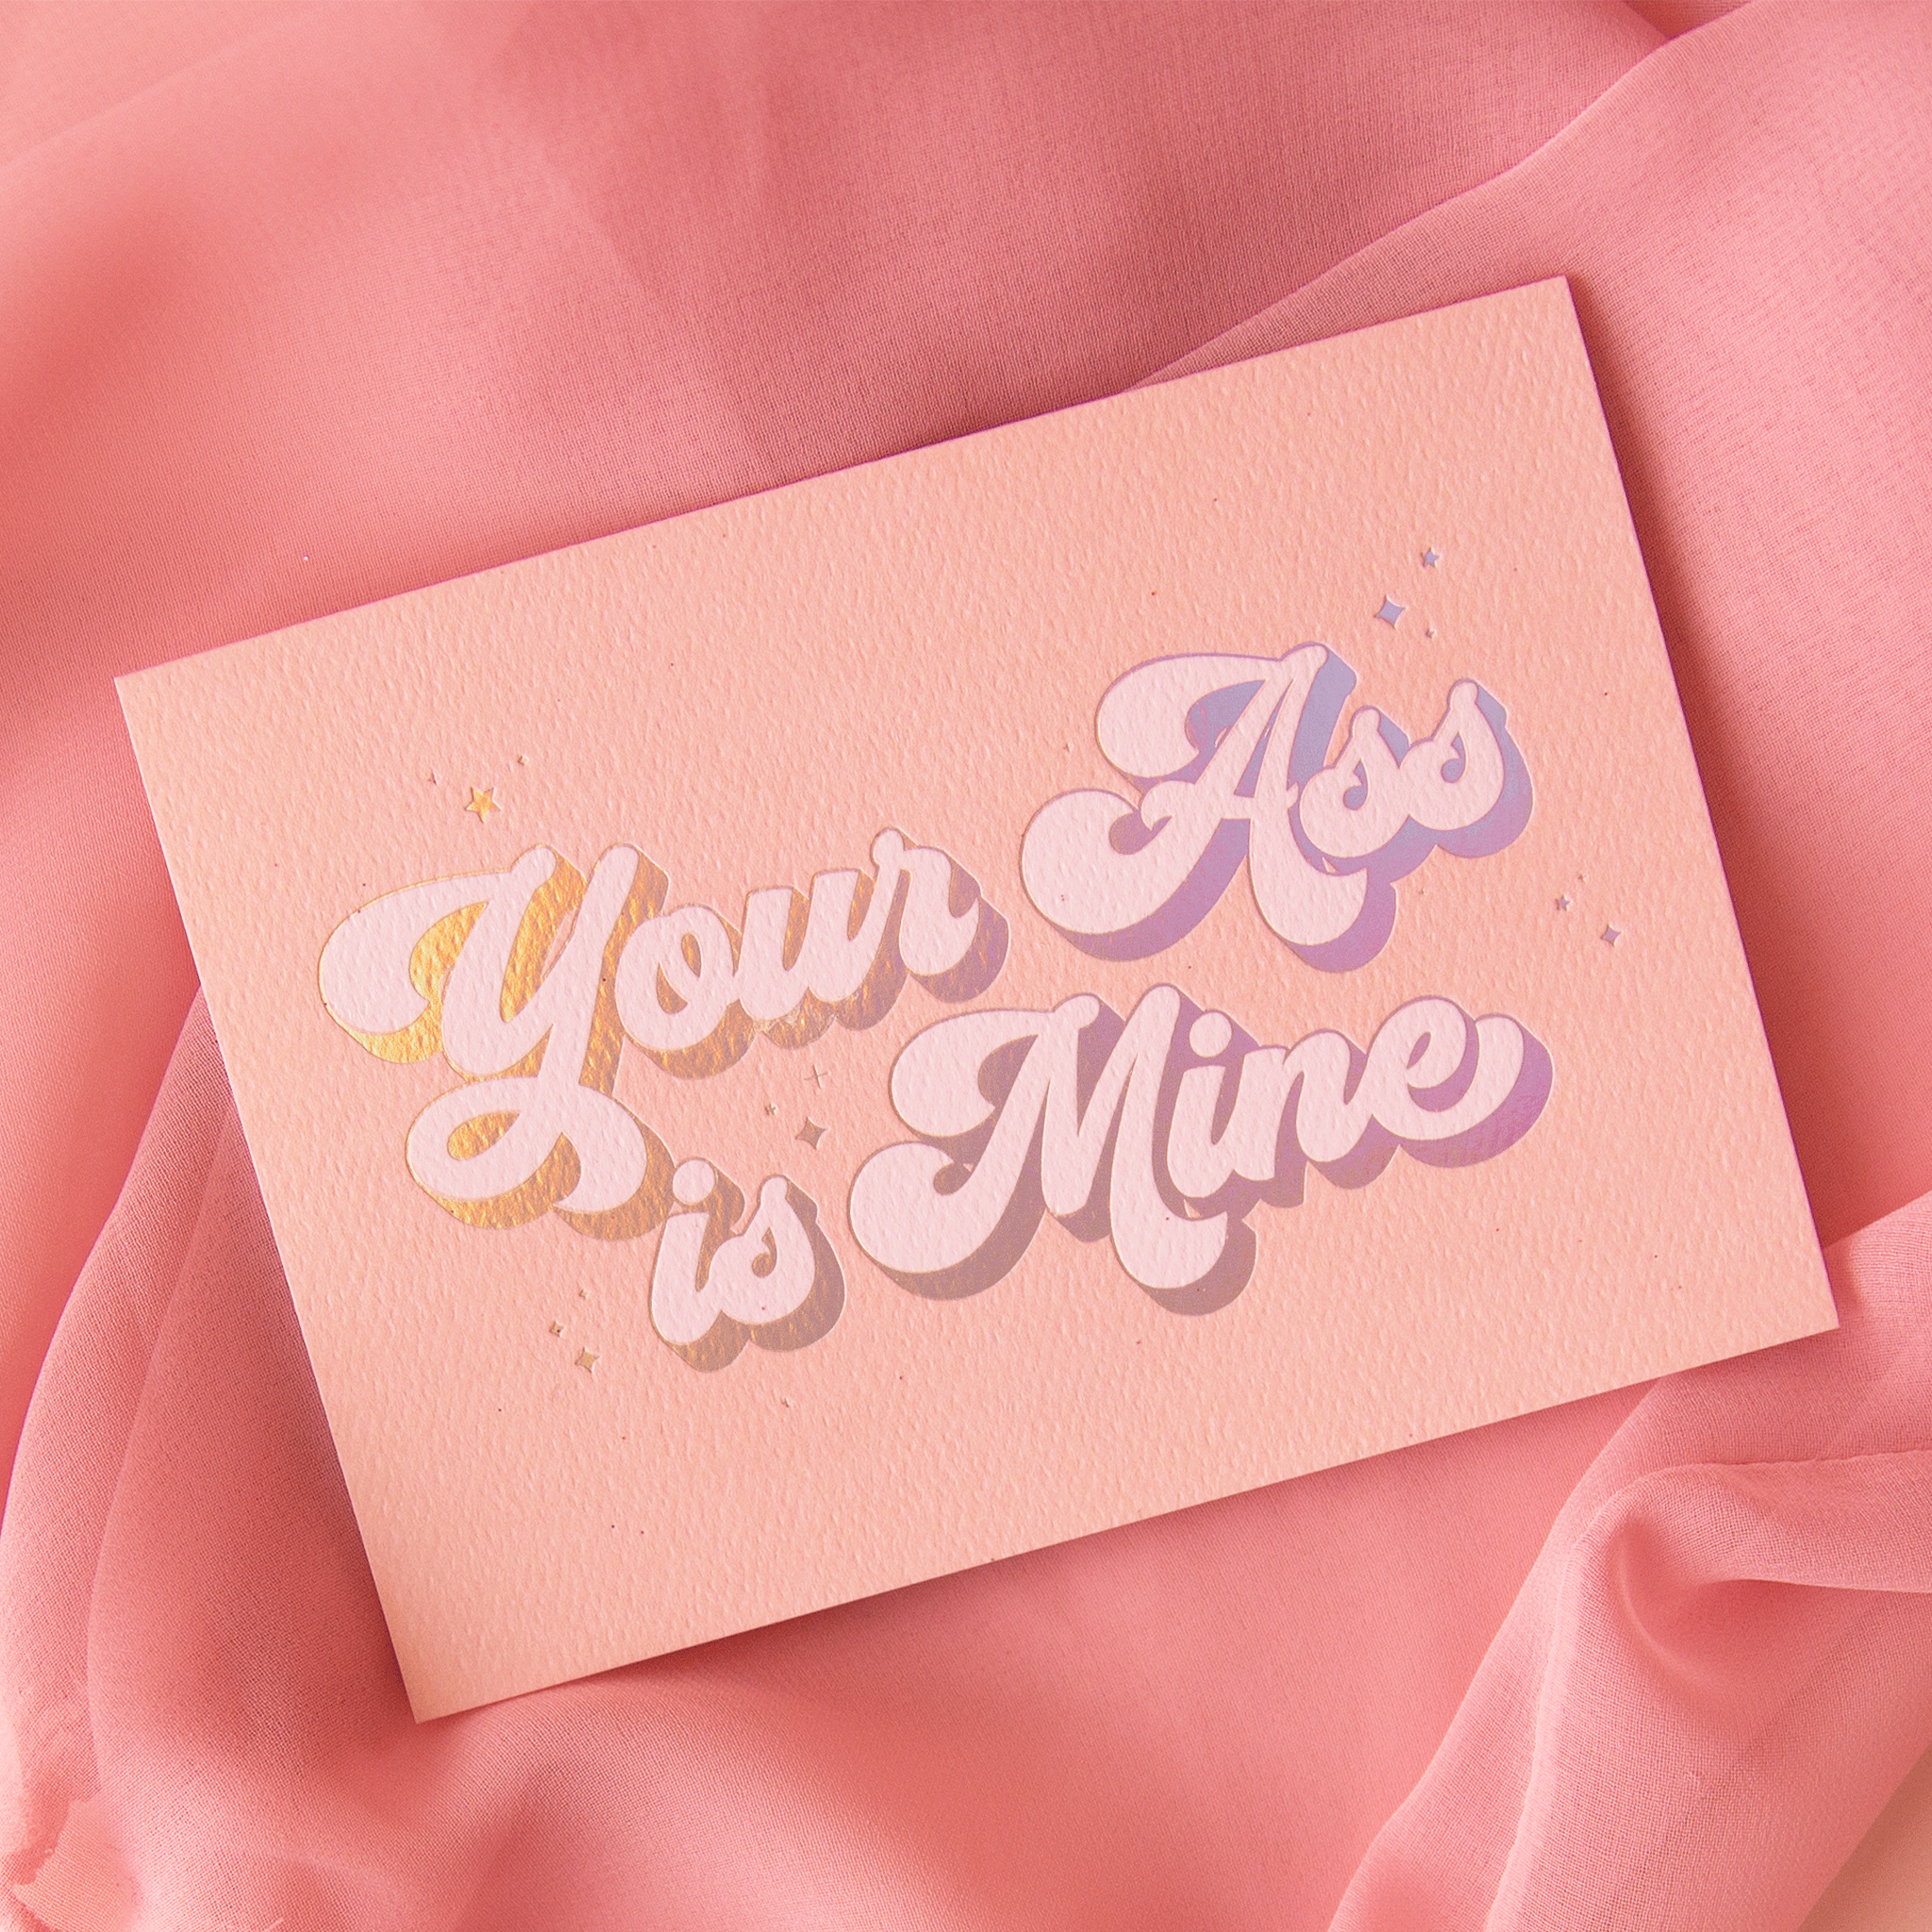 On a pink background is a peachy pink card with holographic and ivory text that reads, "Your Ass is Mine".